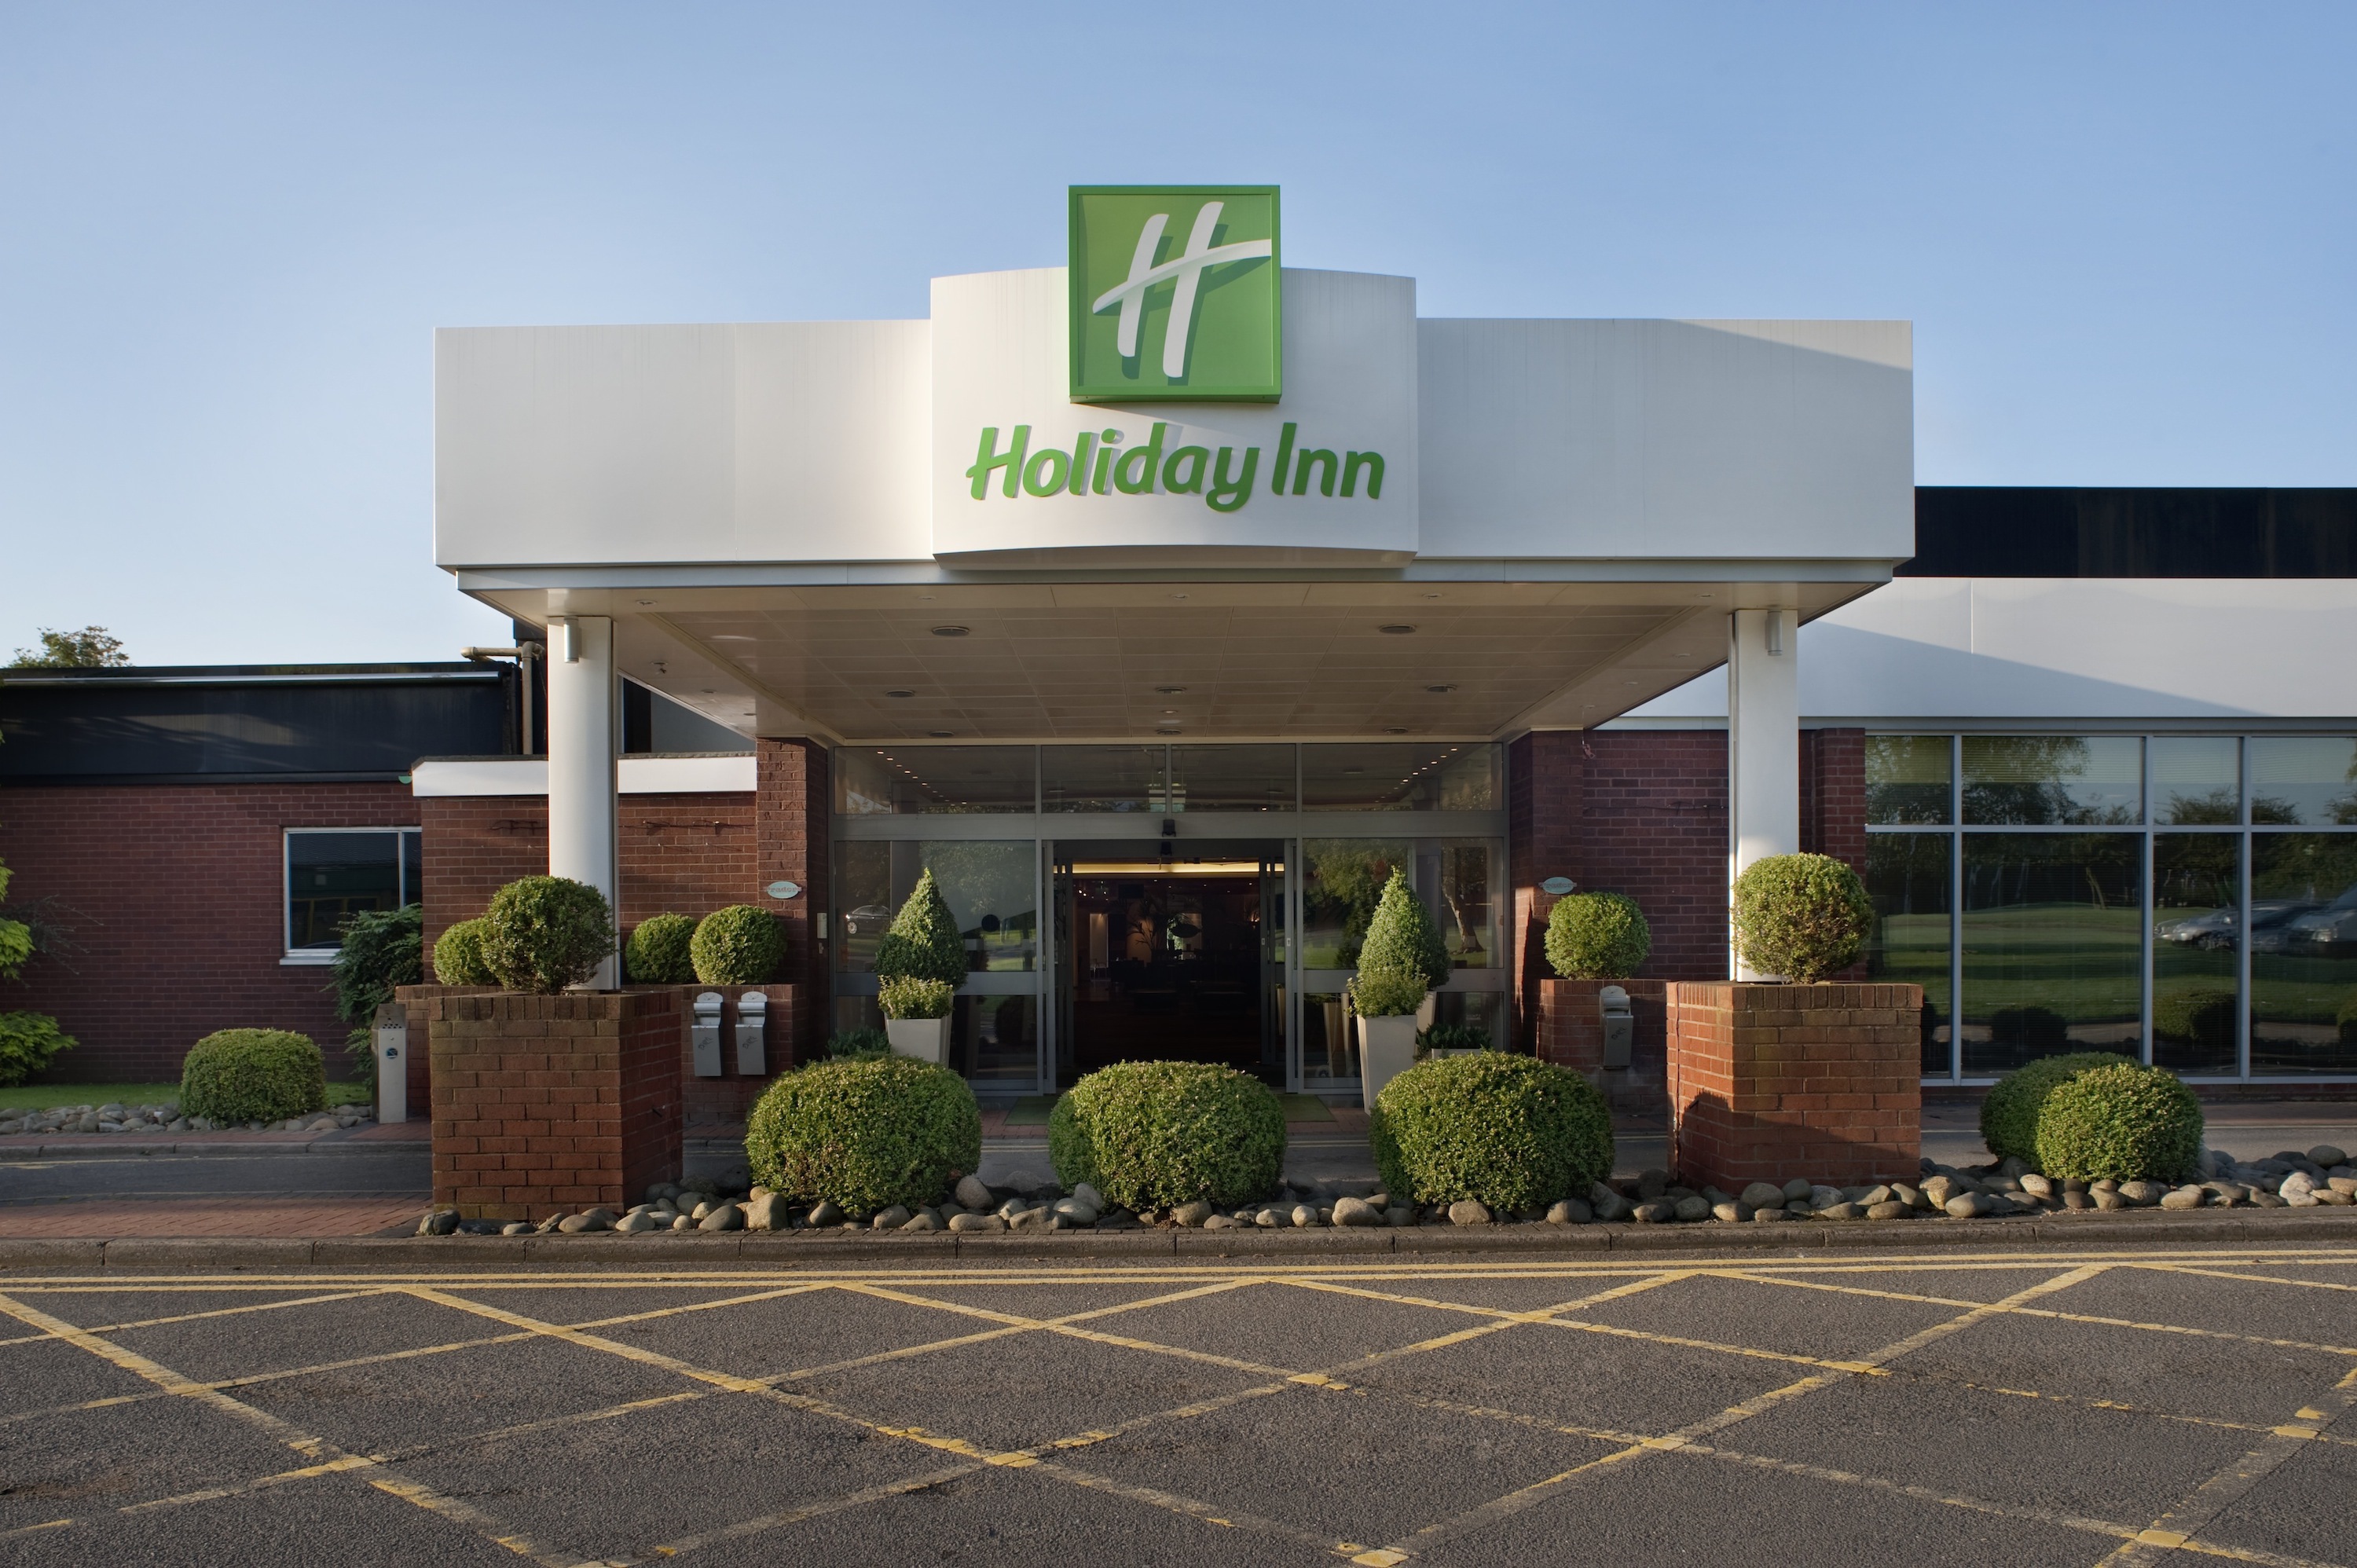 Photo of Holiday Inn Coventry M6 Jct. 2, Coventry, United Kingdom